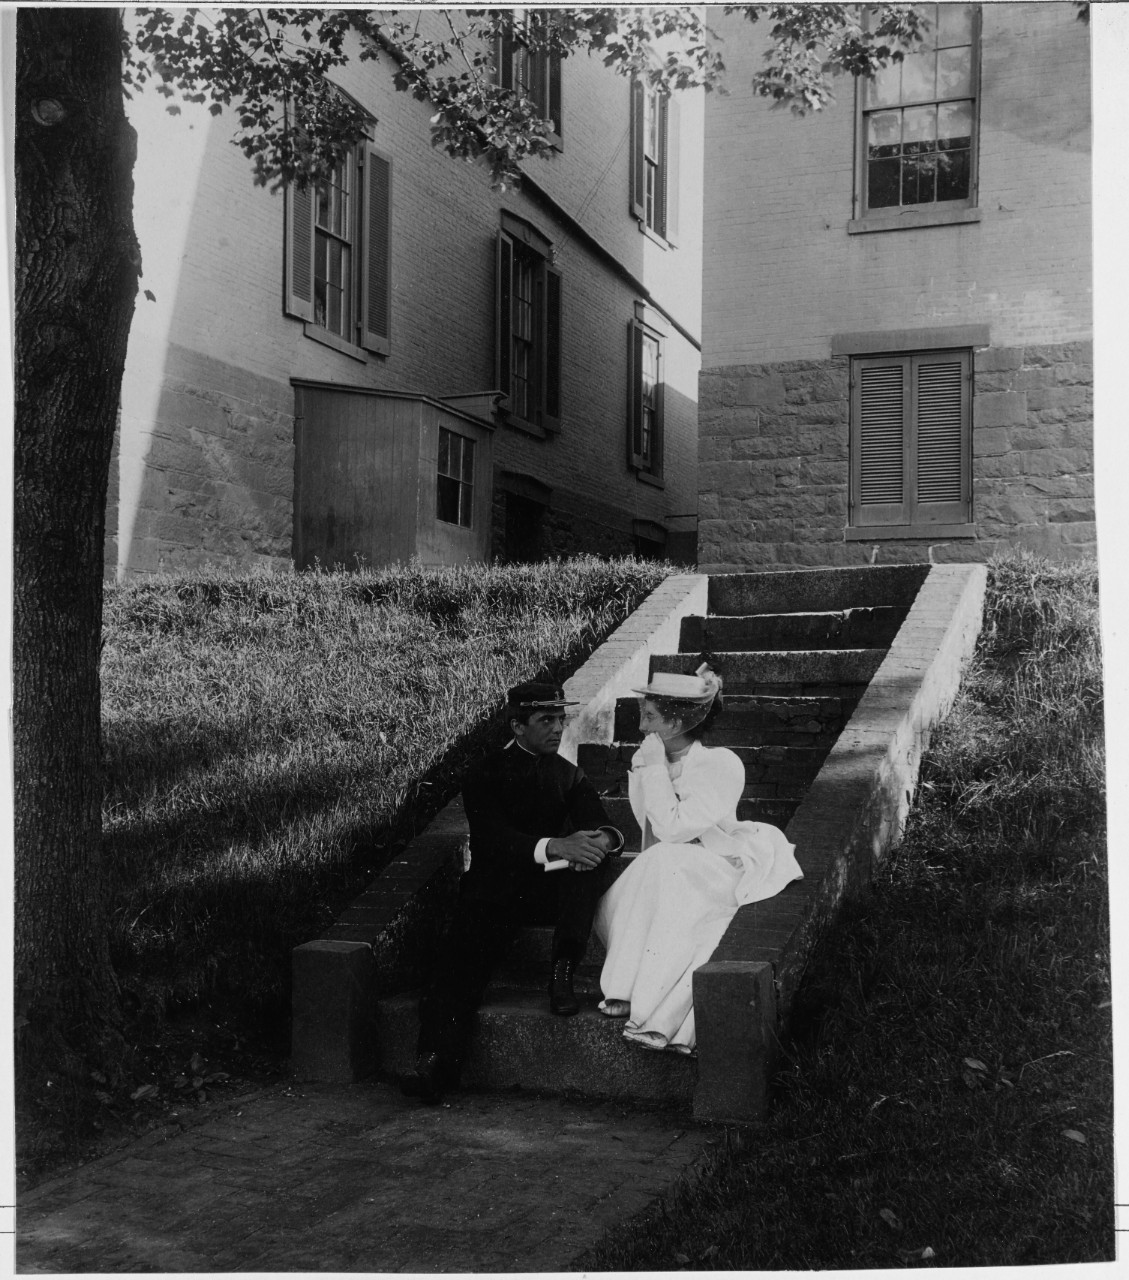 Midshipman Charles E. Gilpin with lady at Naval Academy, Annapolis, Maryland, 1892-1896.